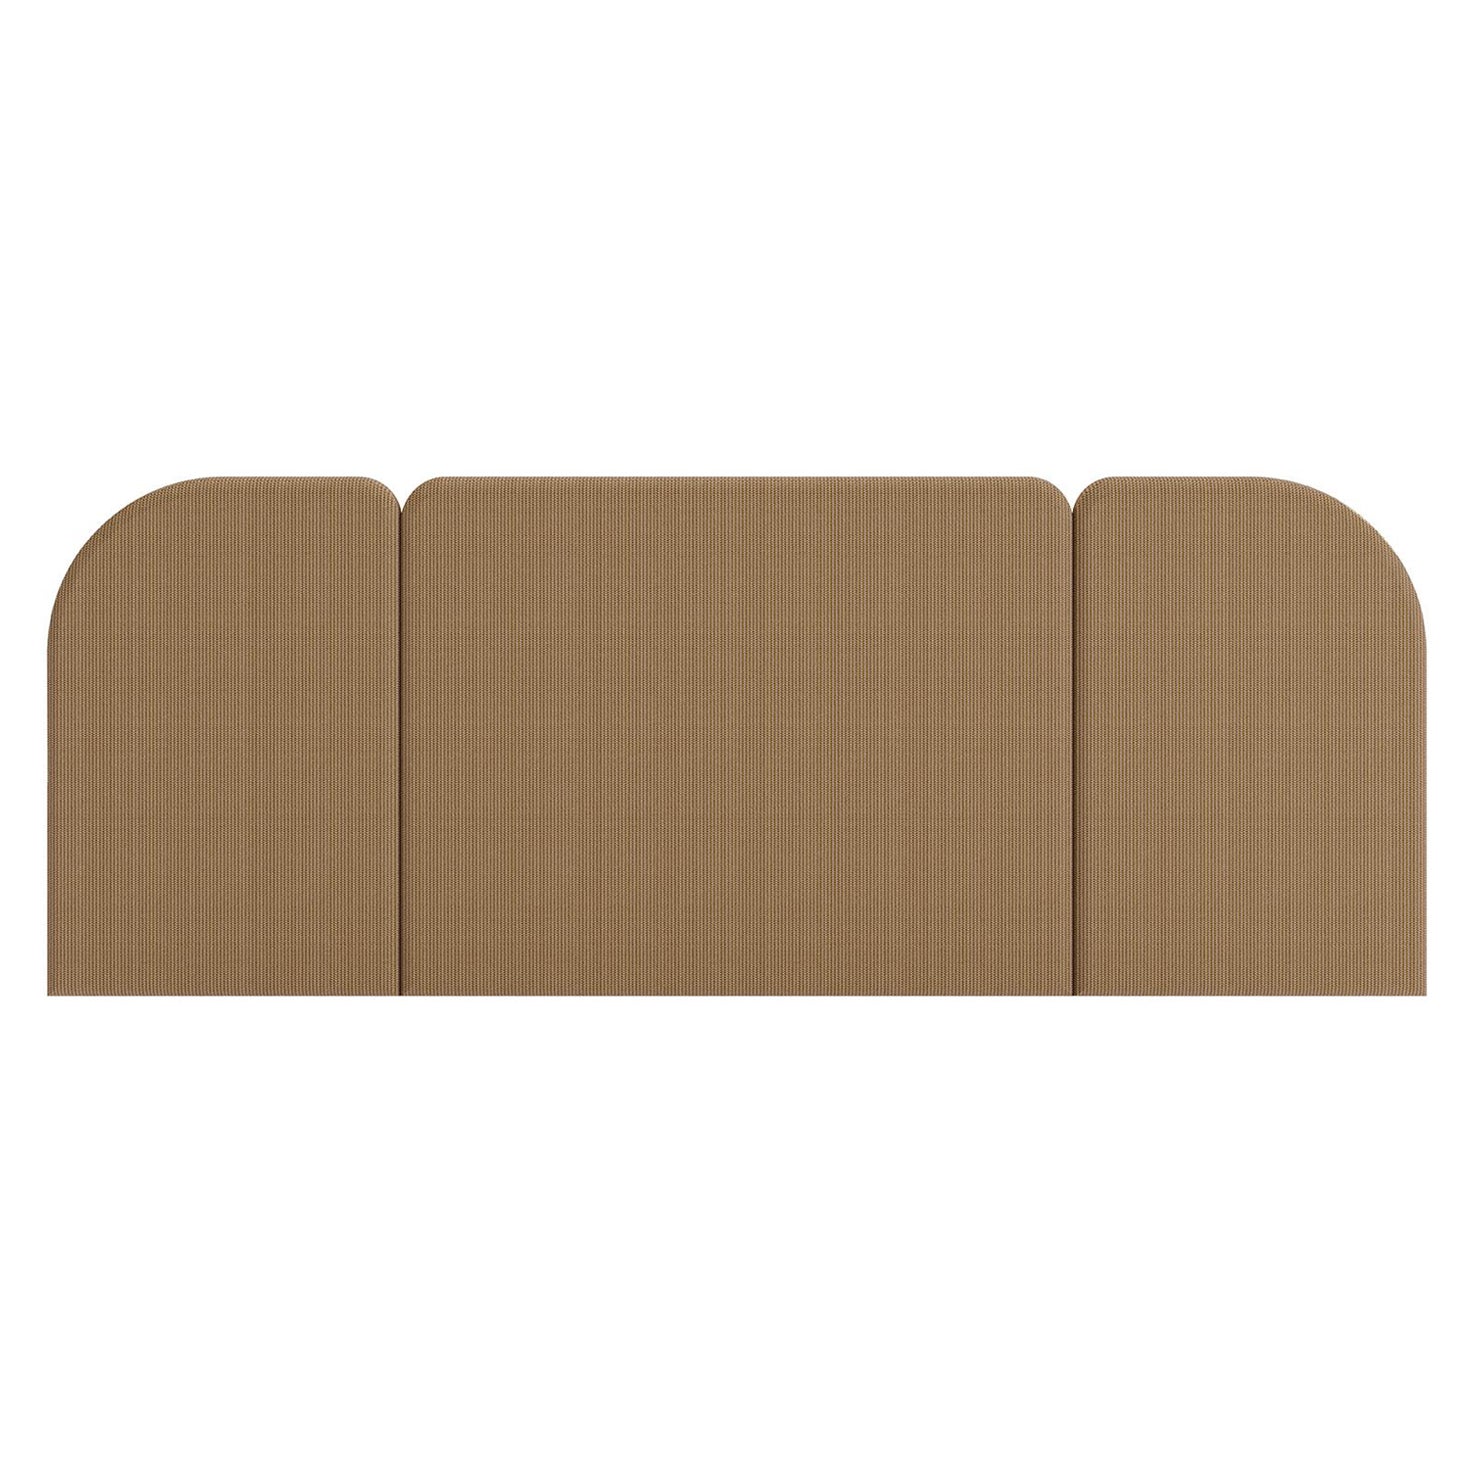 ENYO headboard in cappuccino Velvet, 3 modules For Sale